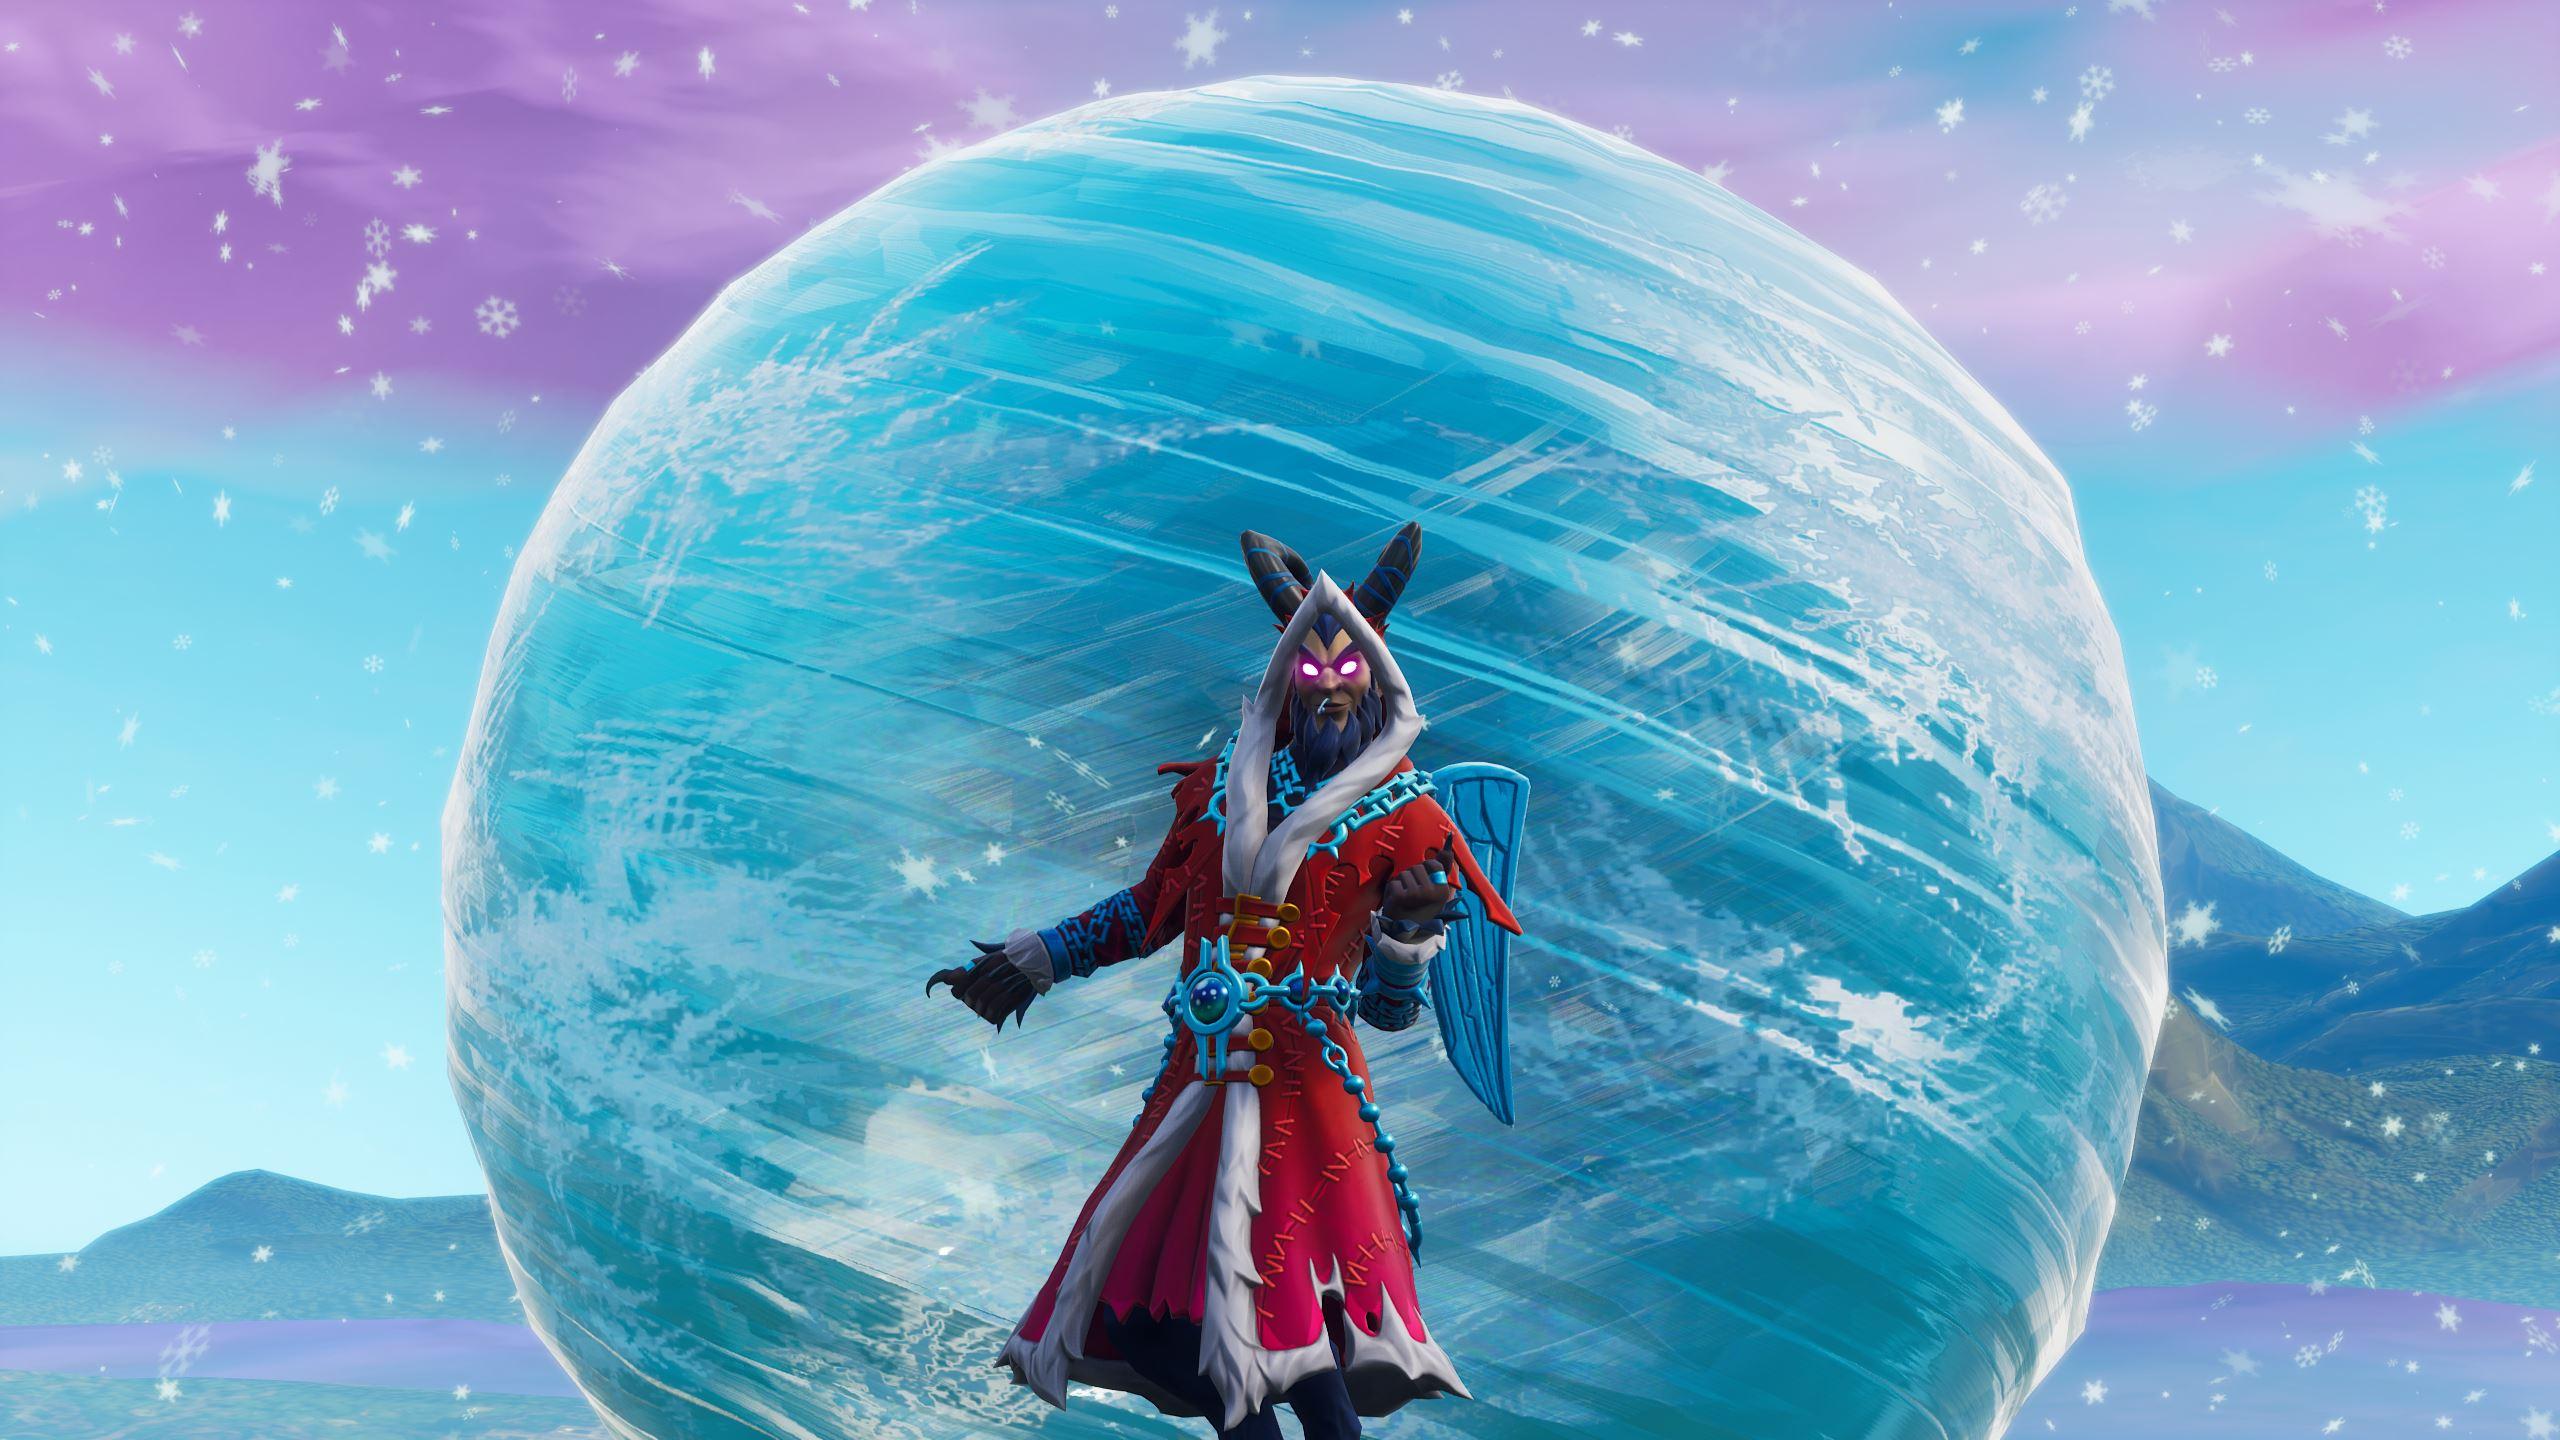 Fortnite: what's going on with the orb and the iceberg near Happy